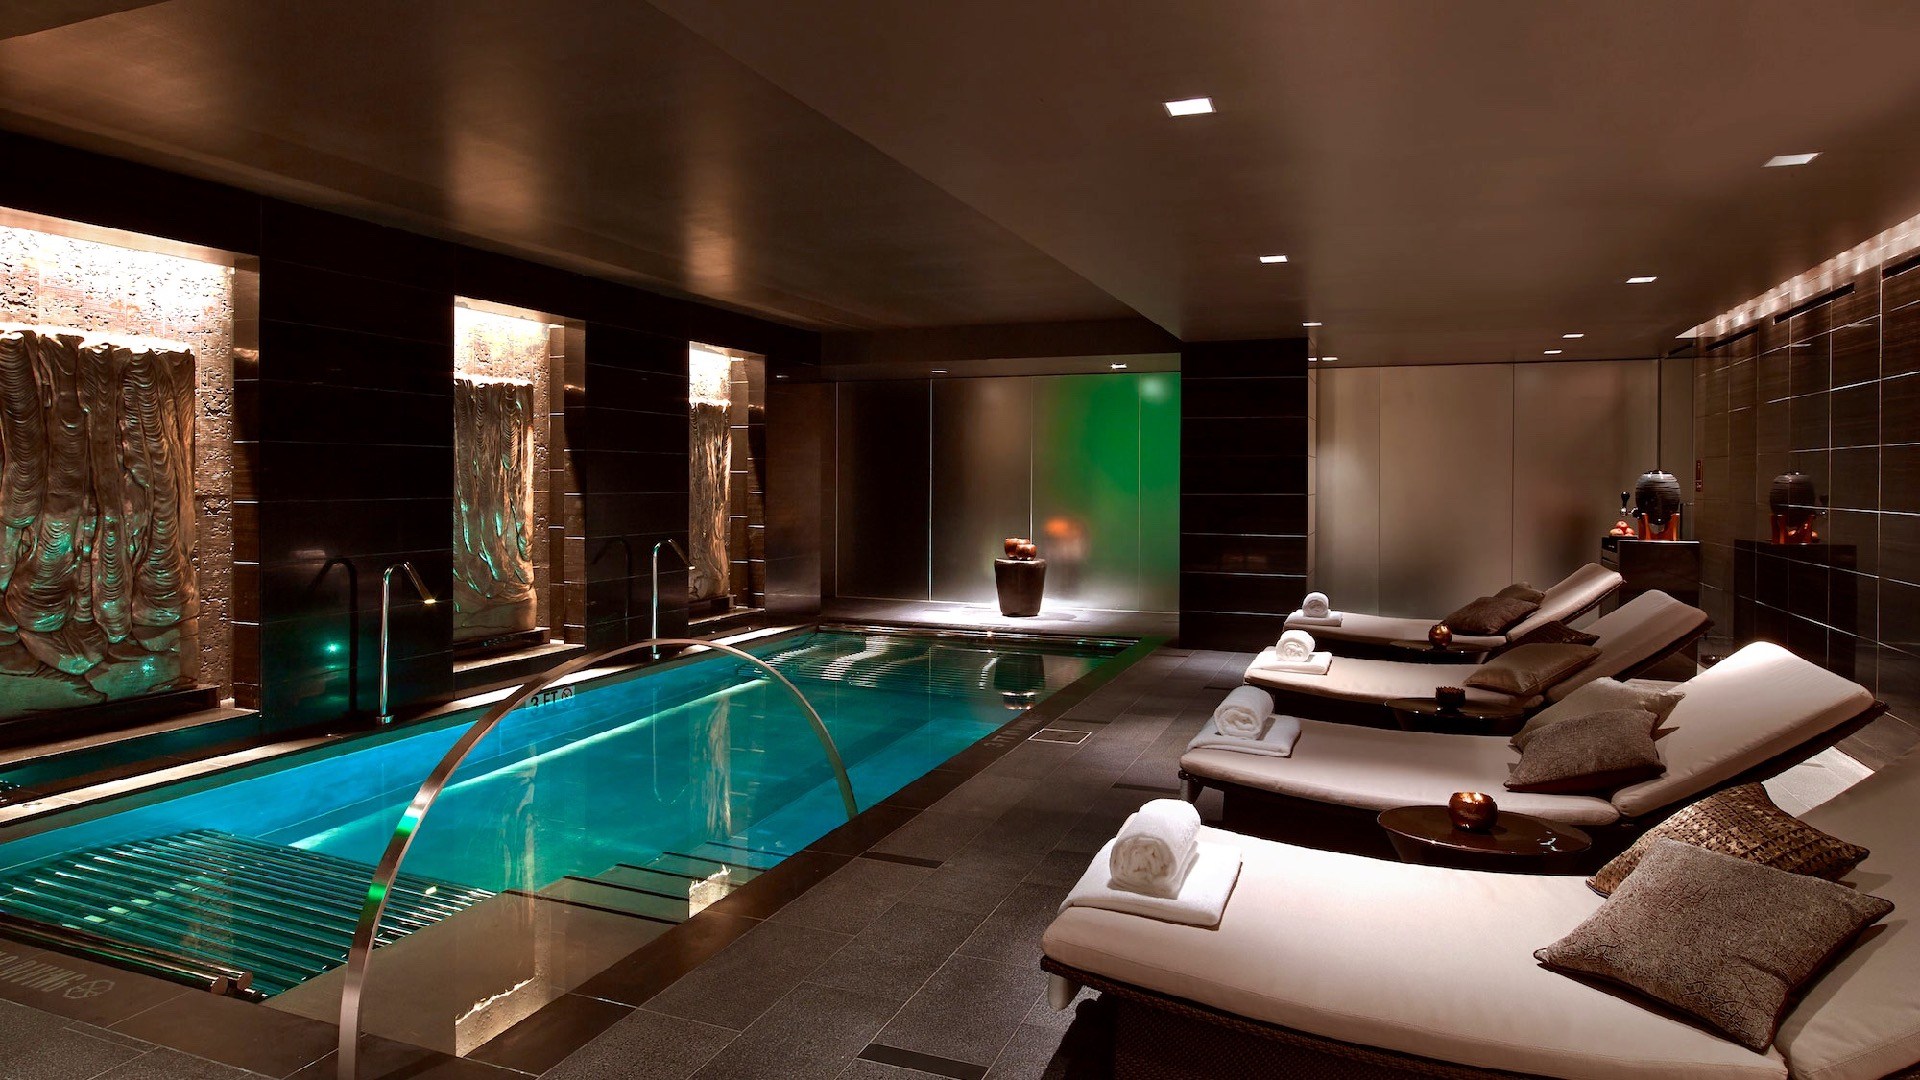 The Spa at The Joule, Dallas, Texas